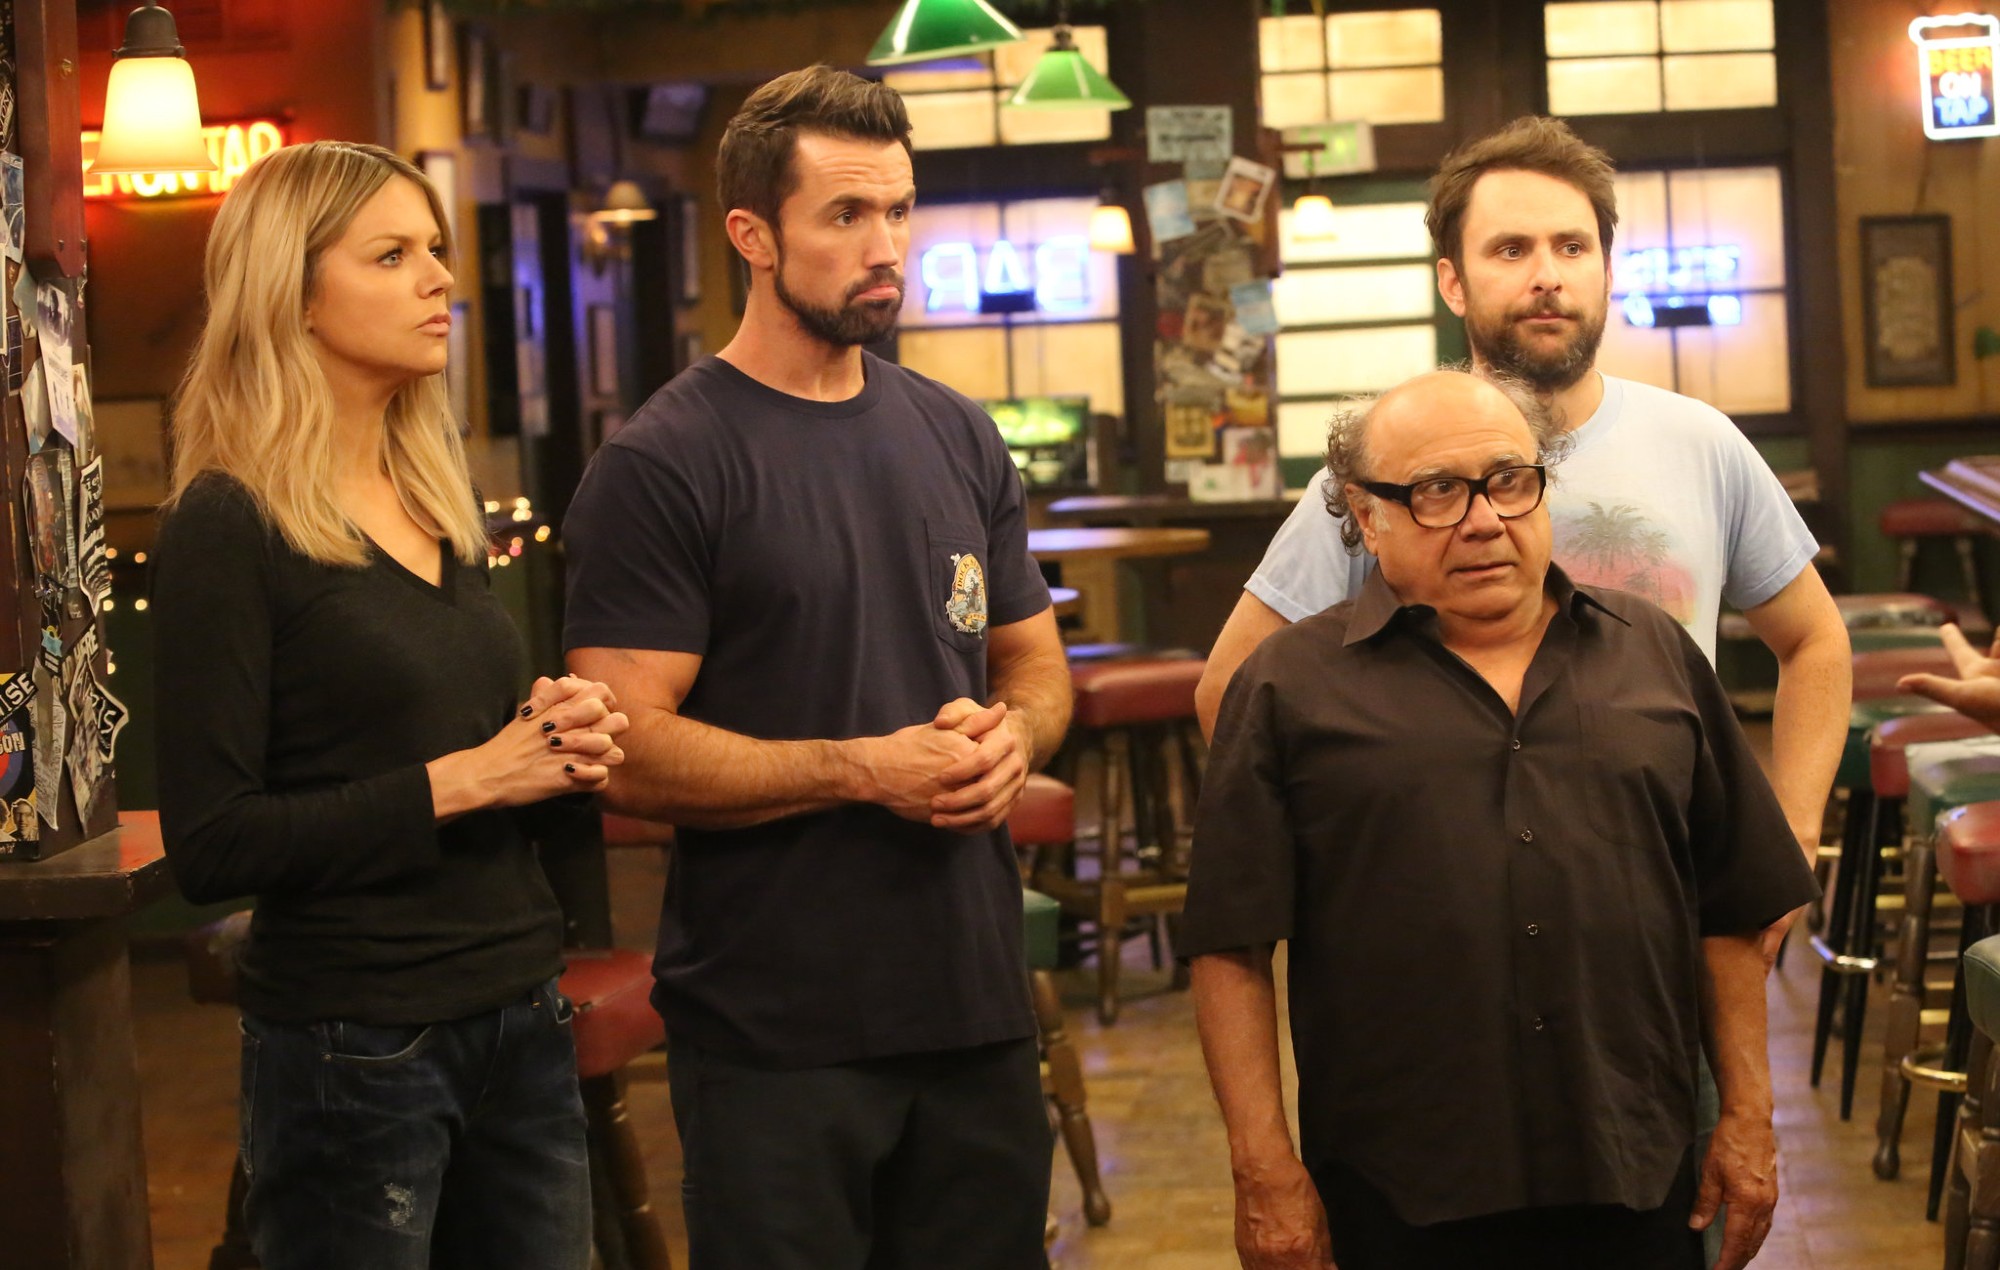 Four Seasons Total Landscaping might cameo in 'It's Always Sunny'